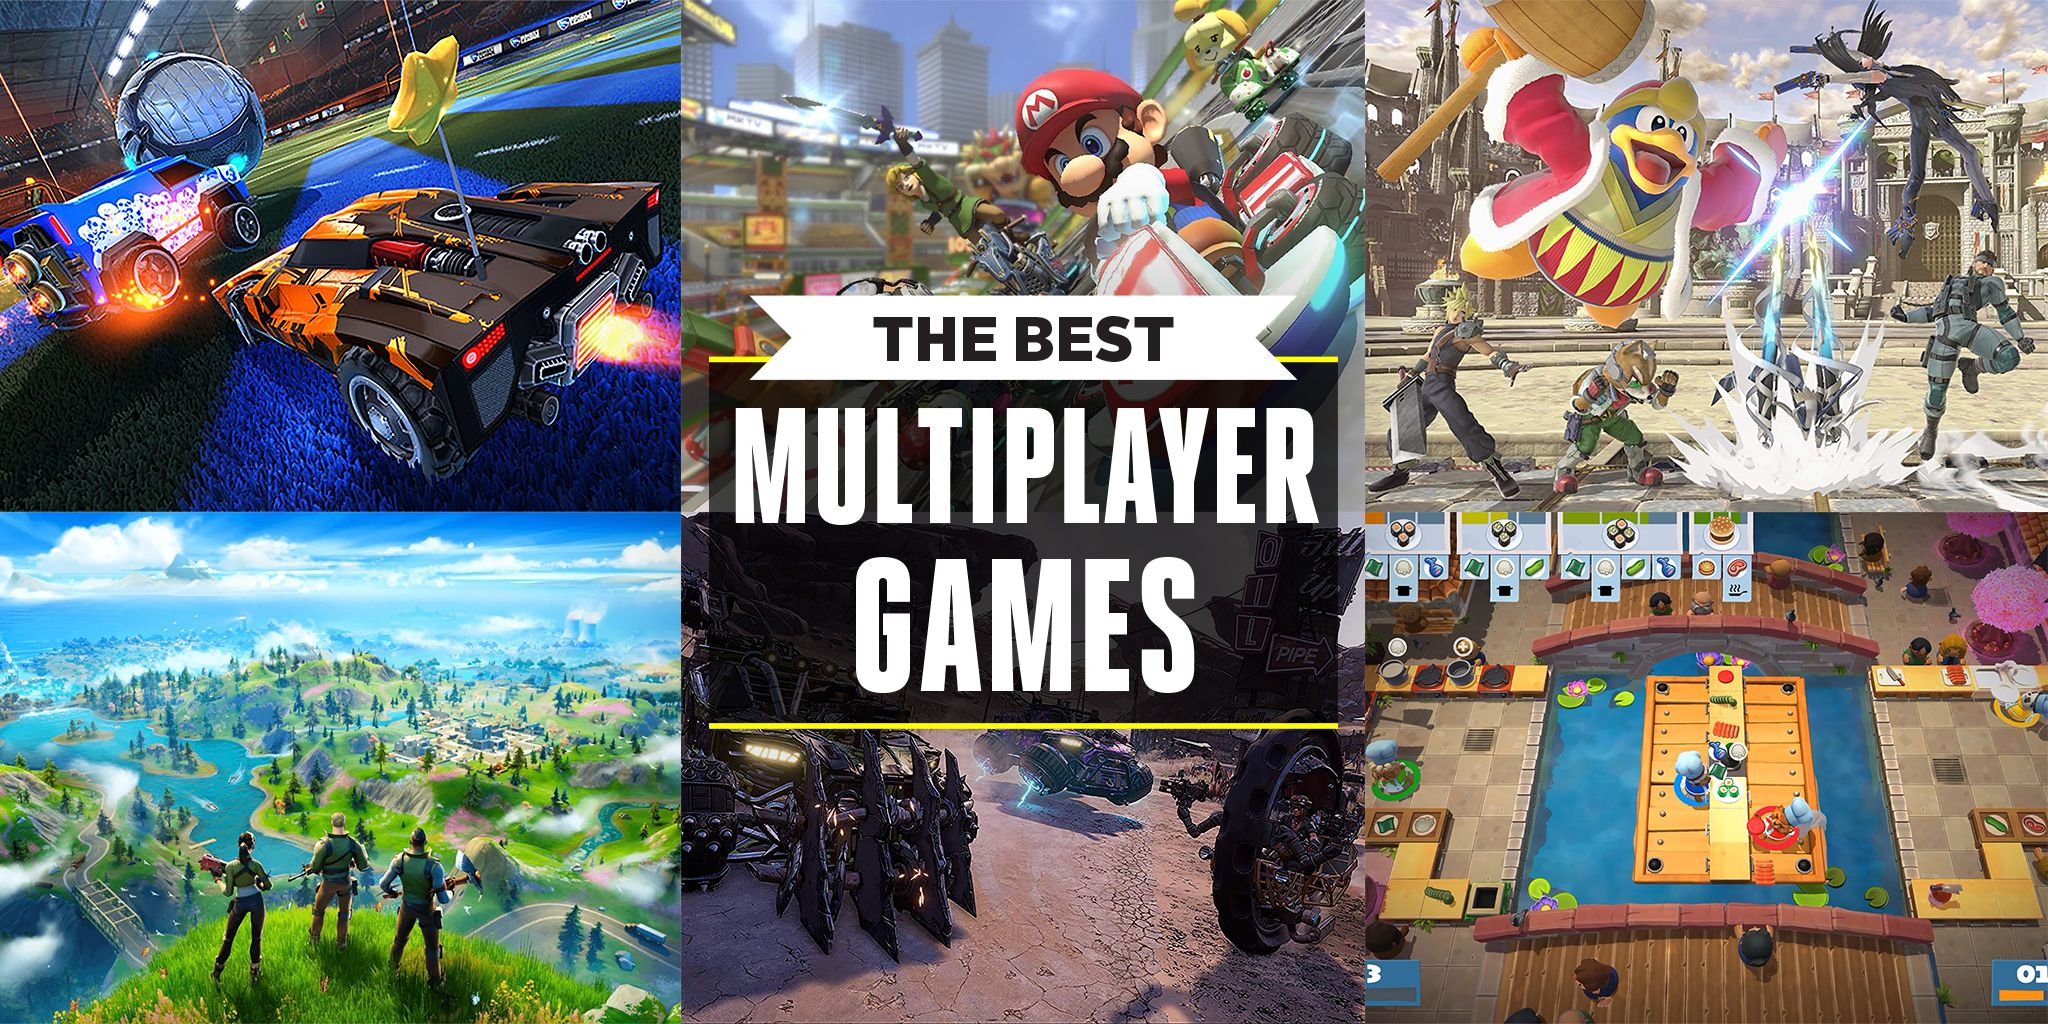 A picture of multiplayer games